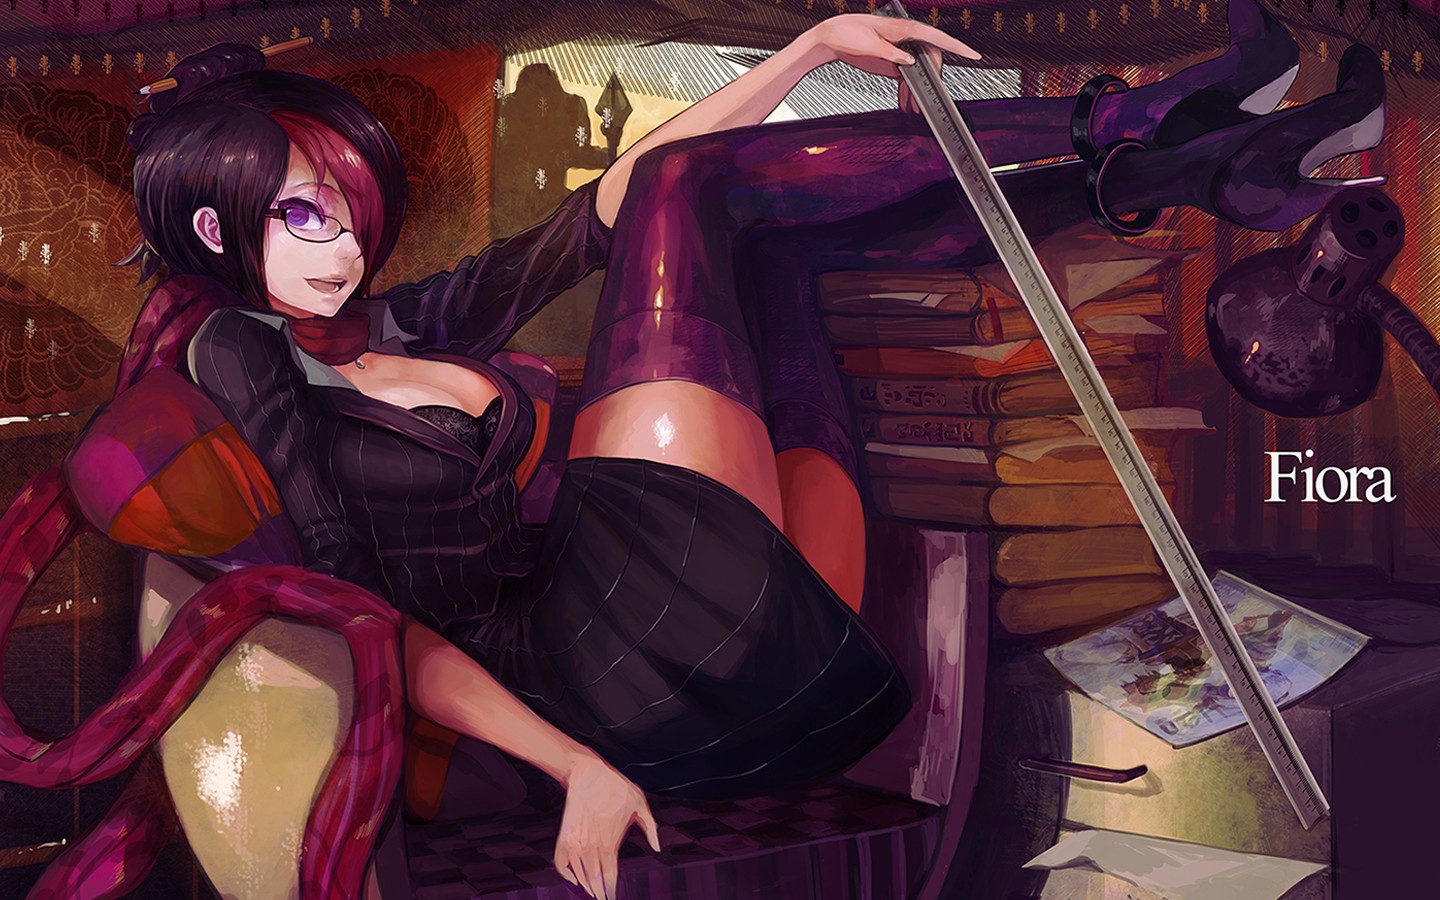 Anime 1440x900 League of Legends video games women knee-highs anime girls anime legs up legs together stockings heels purple eyes women with glasses legs video game art video game girls Fiora (League of Legends)